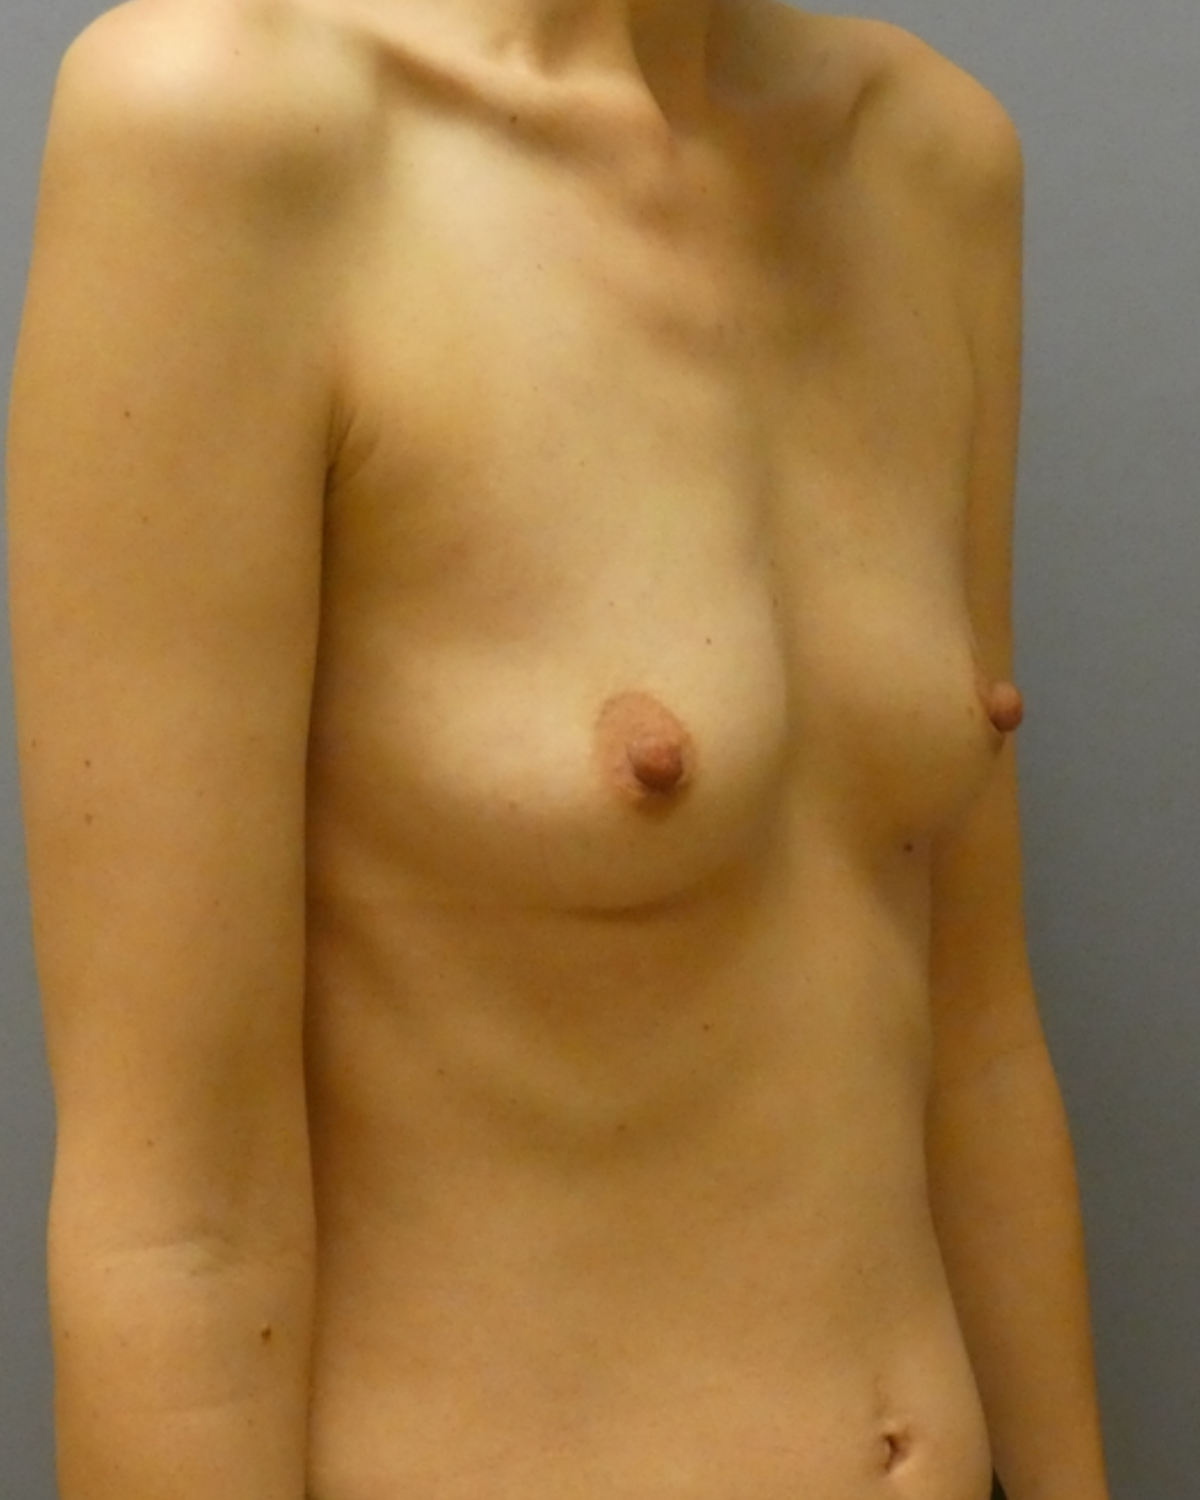 Breast Augmentation Gallery Before Patient 1